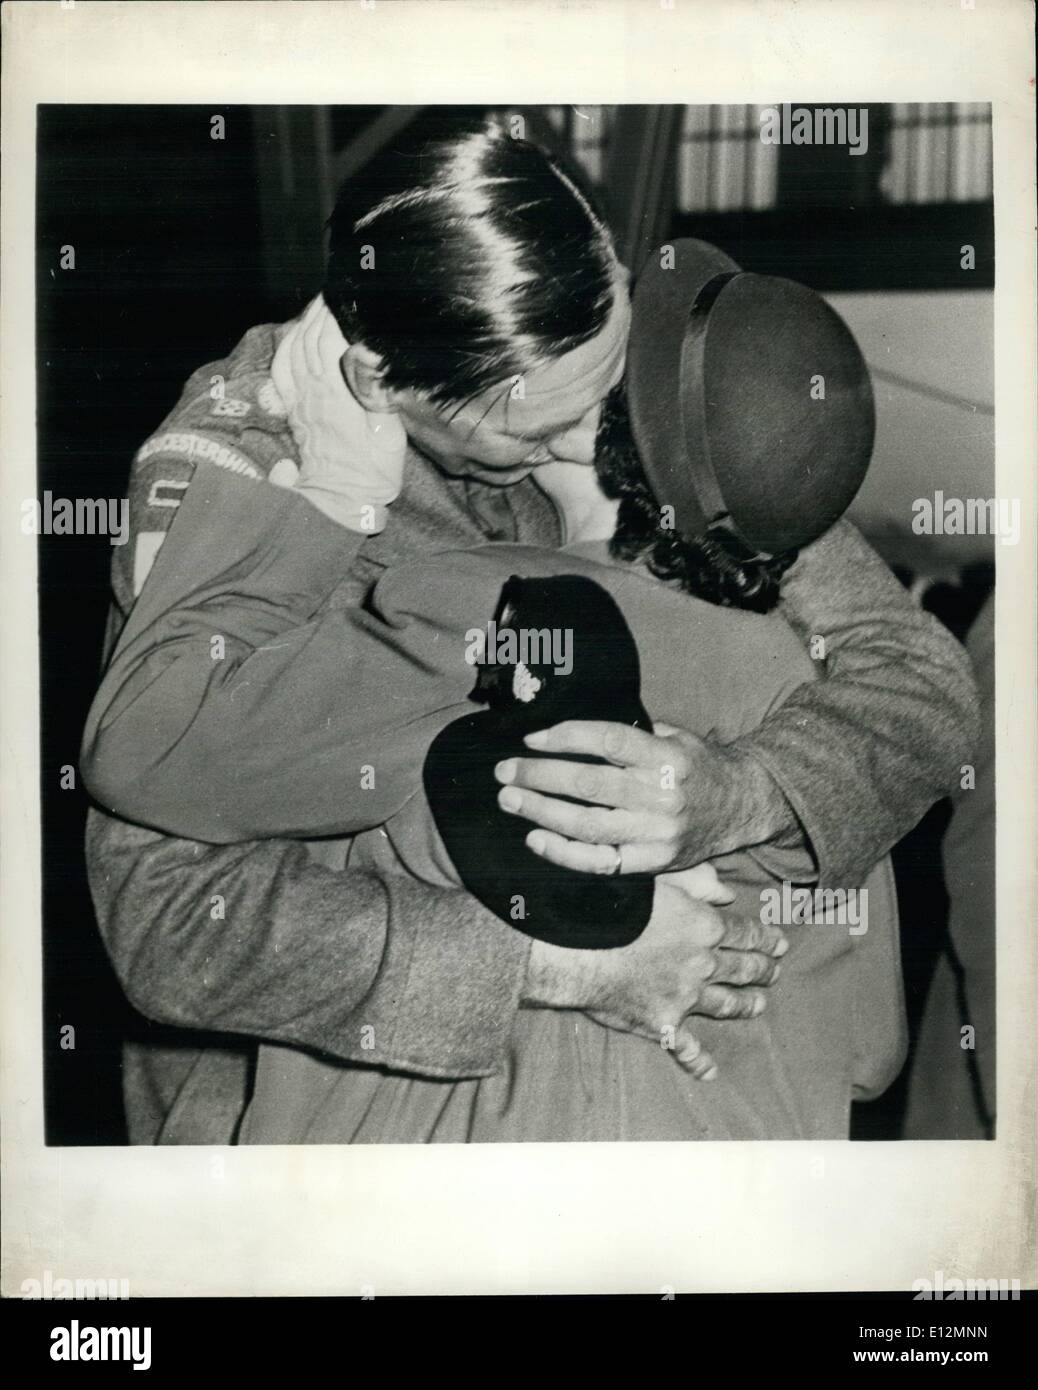 Feb. 24, 2012 - Heroic Commander's Homecoming from Korea Prison: Included in a recent group of 150 released British prisoners of war to arrive home was Lt. Col. J.P. Carneo, Commander of the 1st Battalion, Gloucestershire Regiment In their heroic saving of the U.N. line on the Imjin in April, 1951. then, at the end of the battalion's four-day stand, the time came for withdrawal, Colonel Carne gave his men permission to fight their way out independently while he stay behind with the wounded and was captured. Photo shows - Lt. Col. Carne is greeted by his wife on land at Southampton, England. Stock Photo